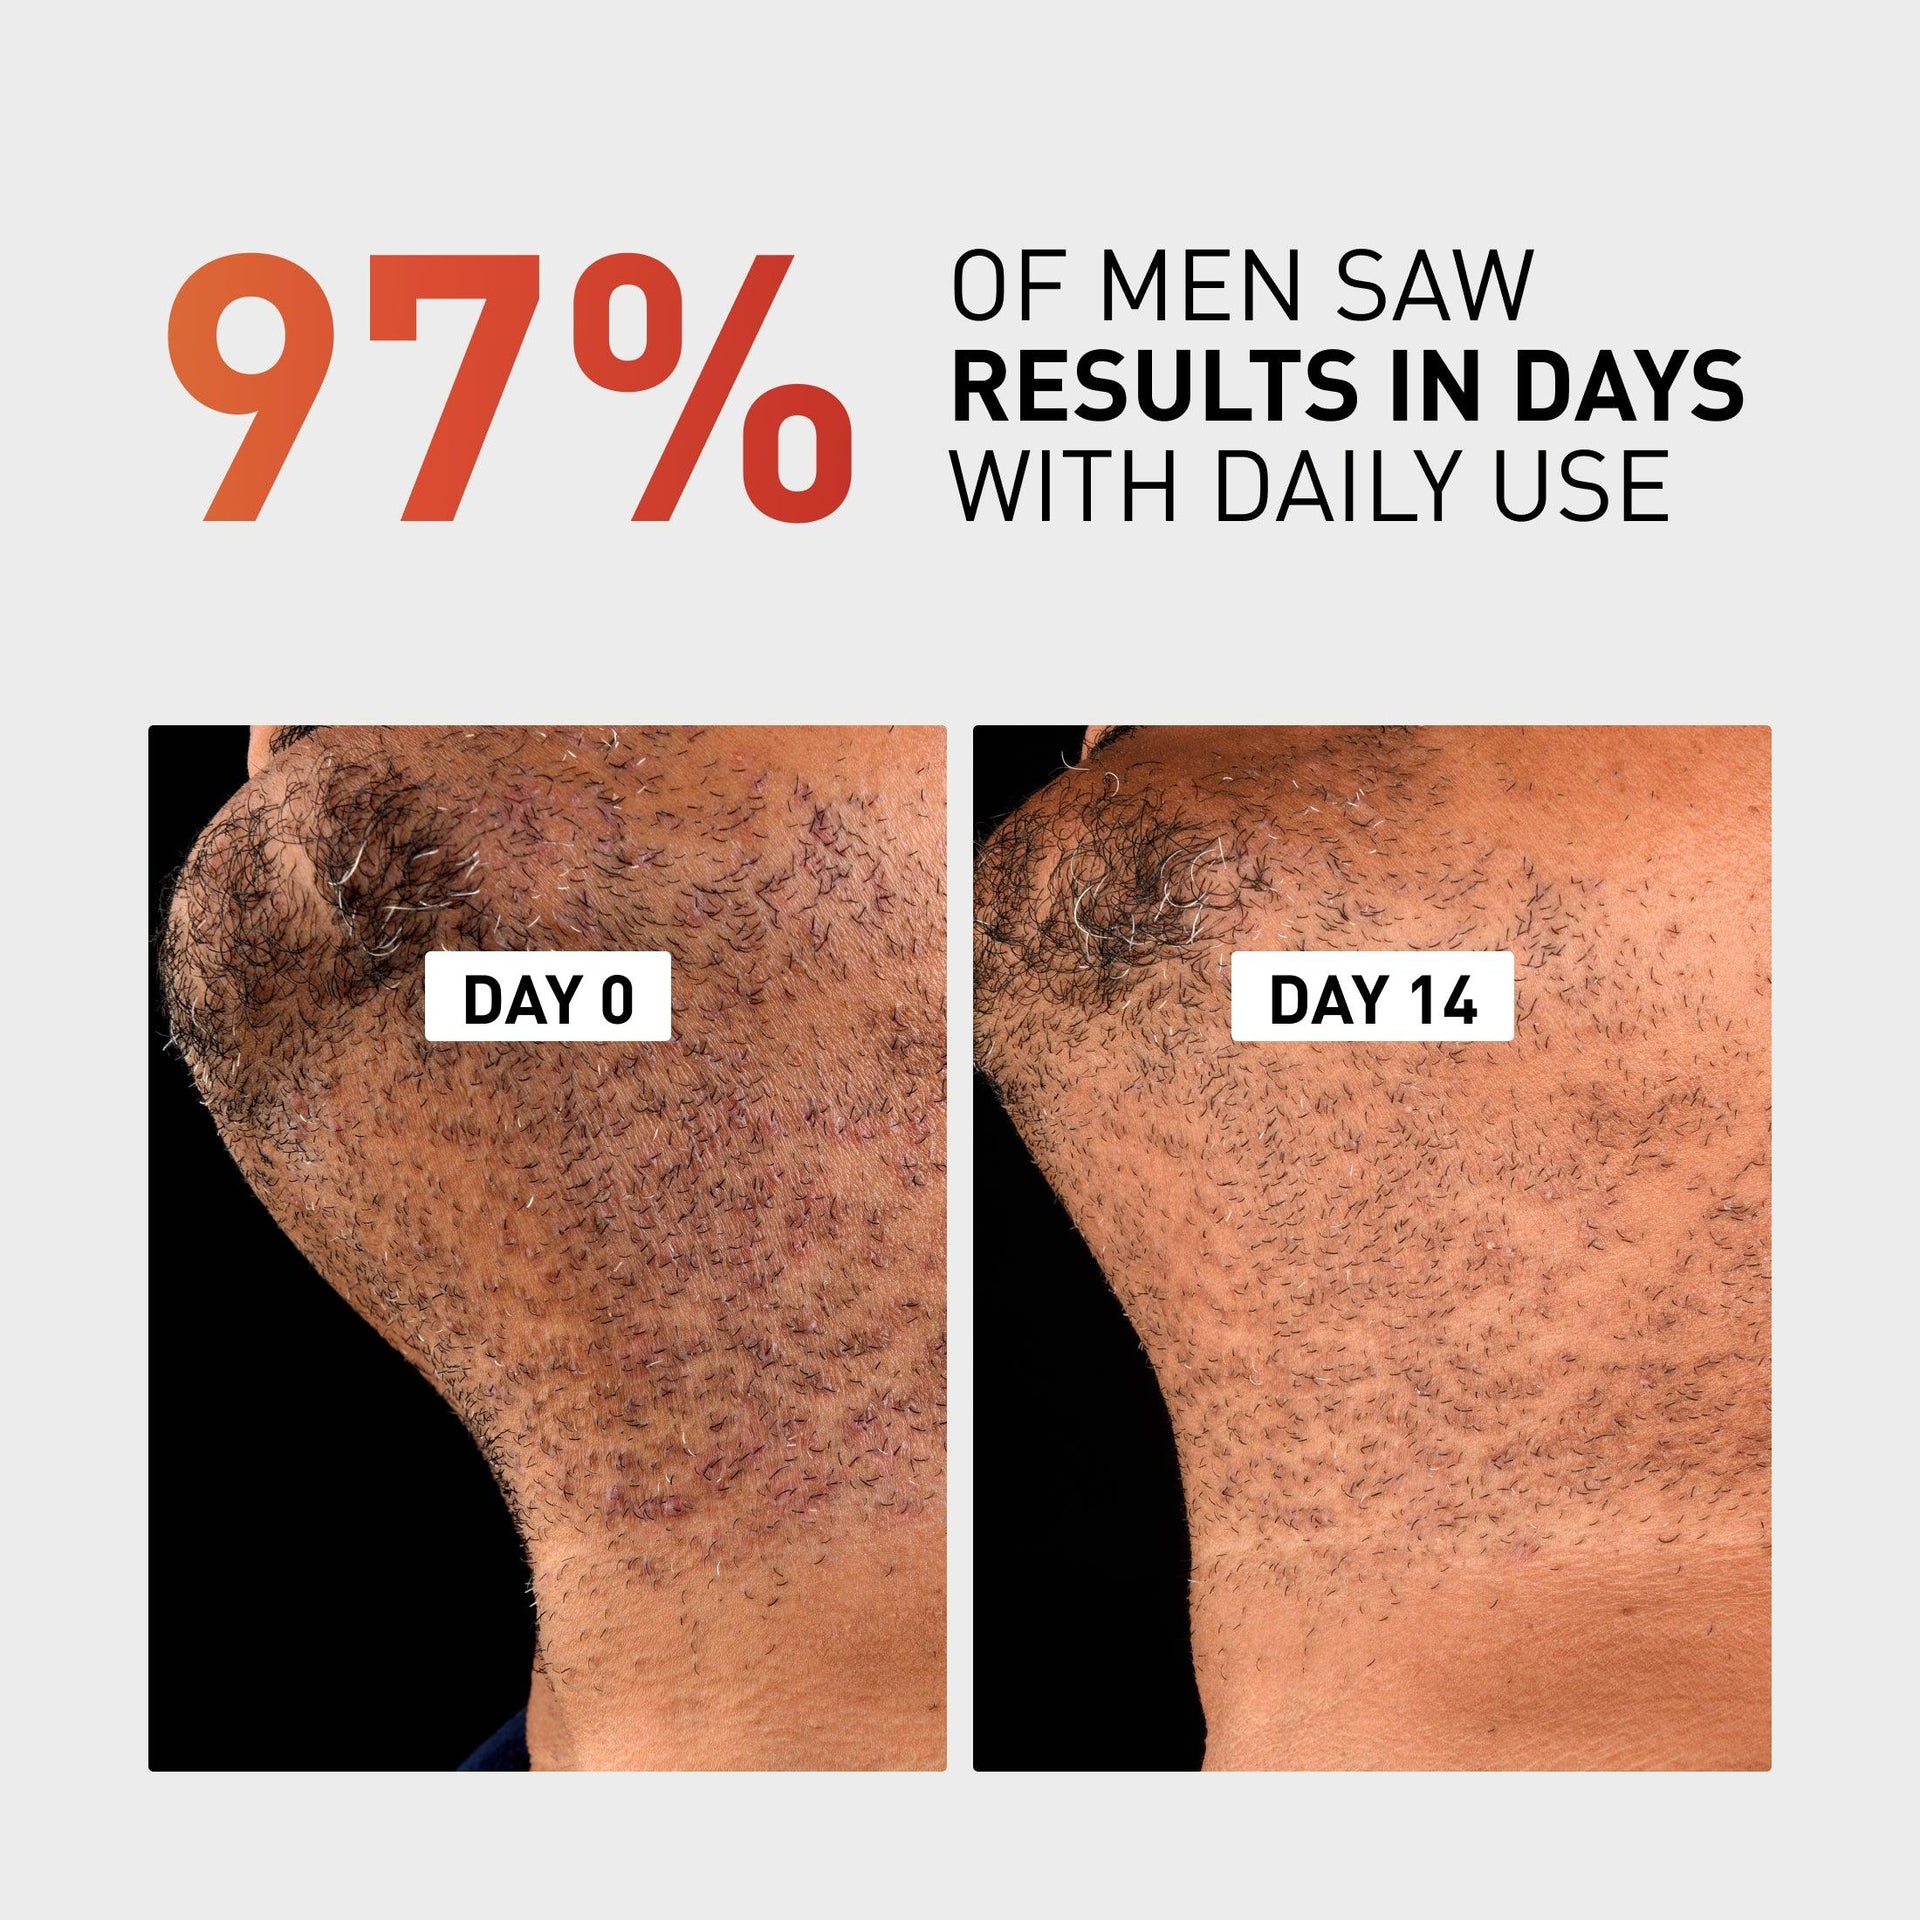 Over 97% of men saw results in days with daily use of Frederick Benjamin Grooming's Bump Clear razor bump cream.